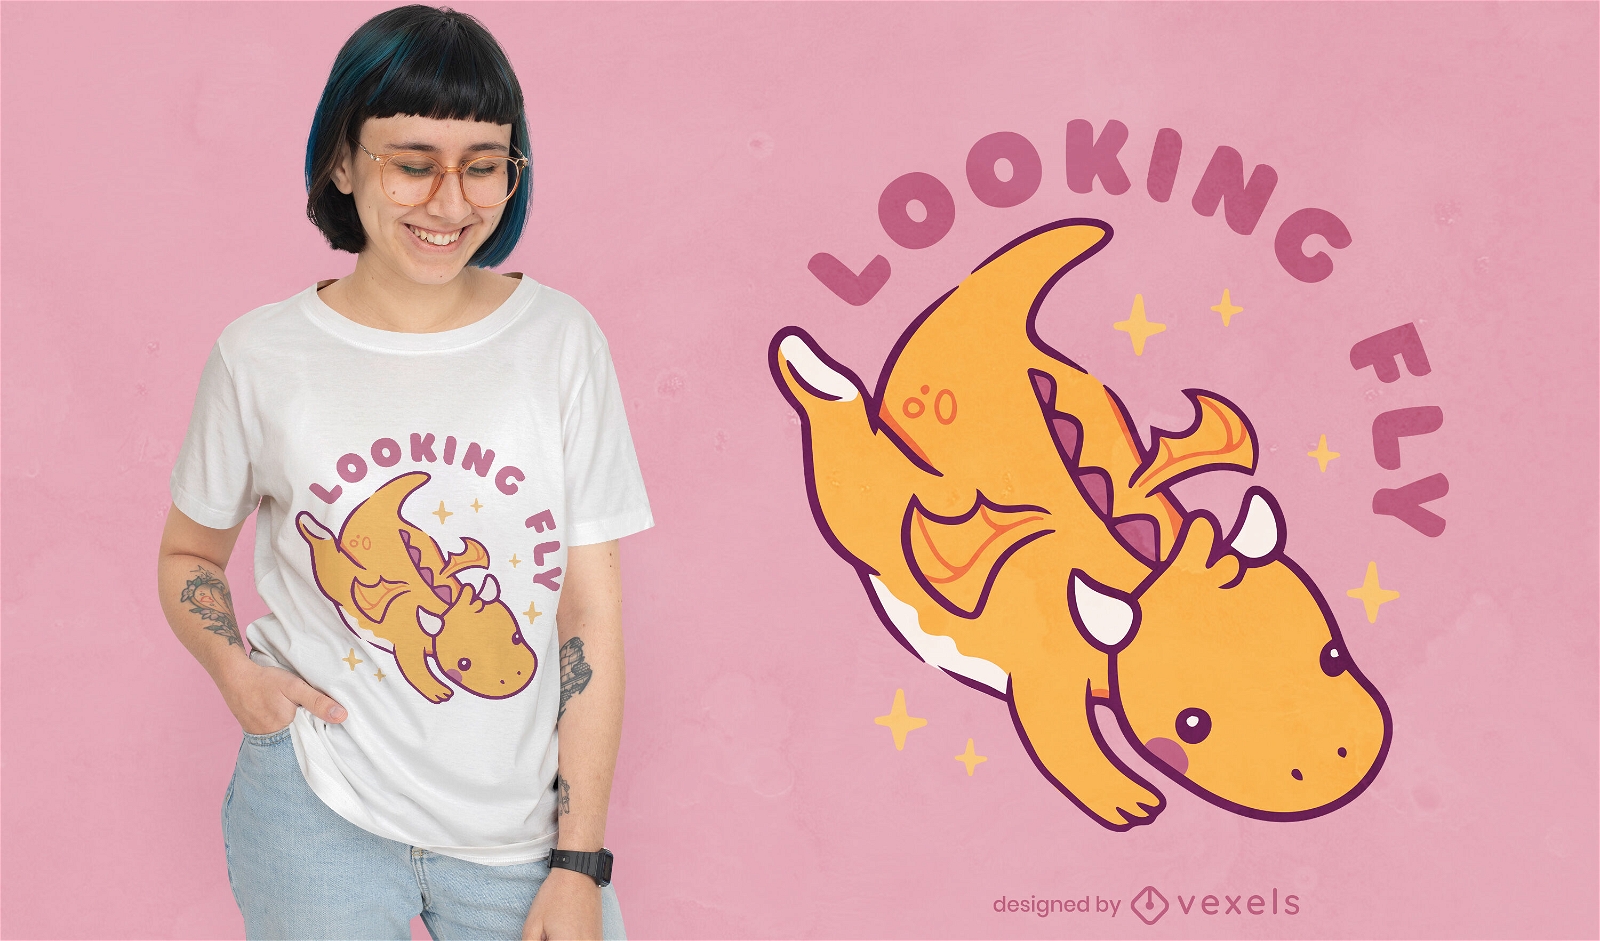 Baby dragon quote t-shirt design